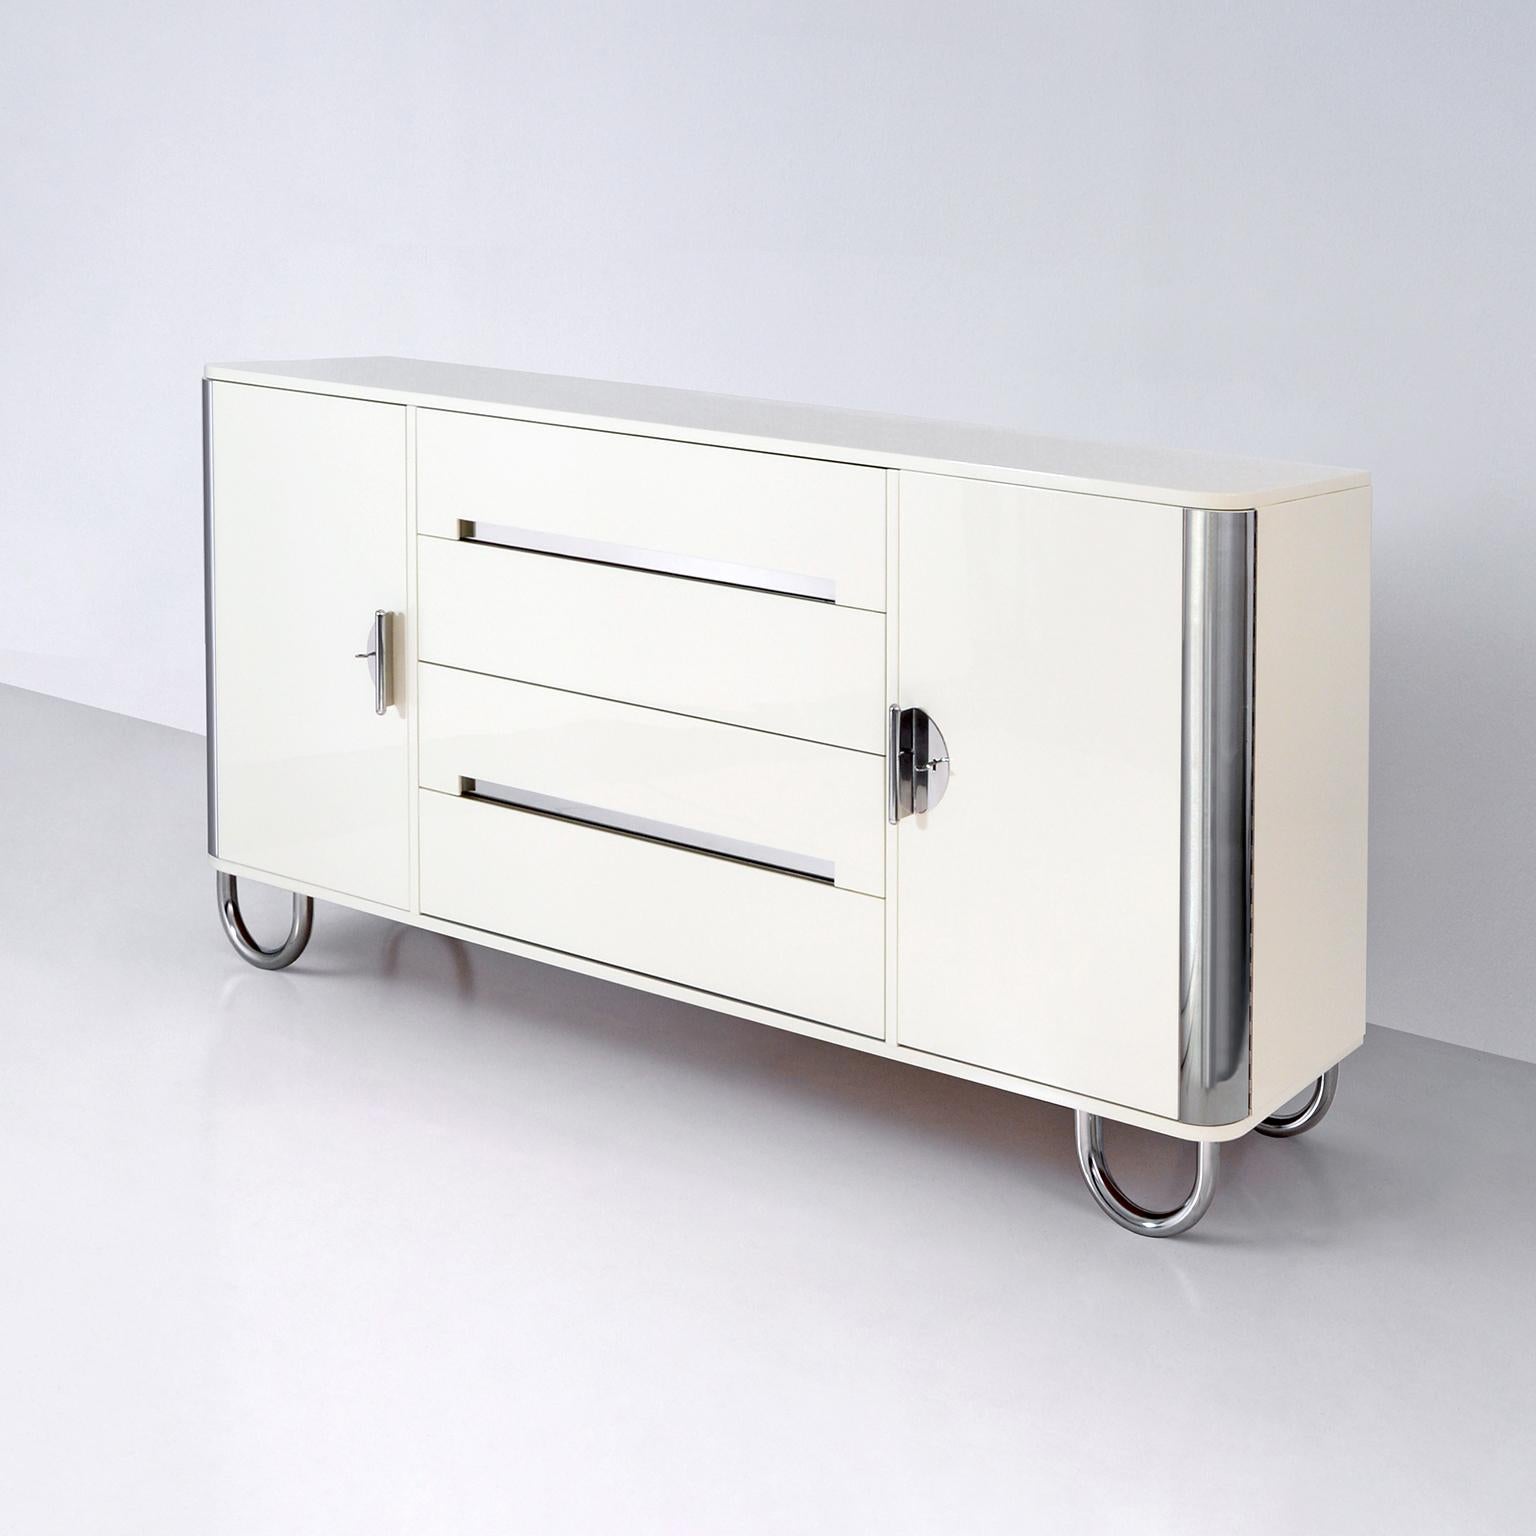 Customized sideboard with two doors and drawers, manufactured by GMD Berlin, exclusively presented in our Rudolf Vichr Collection.

These high-quality, handmade furniture in a classic modern timeless design, are made from selected materials